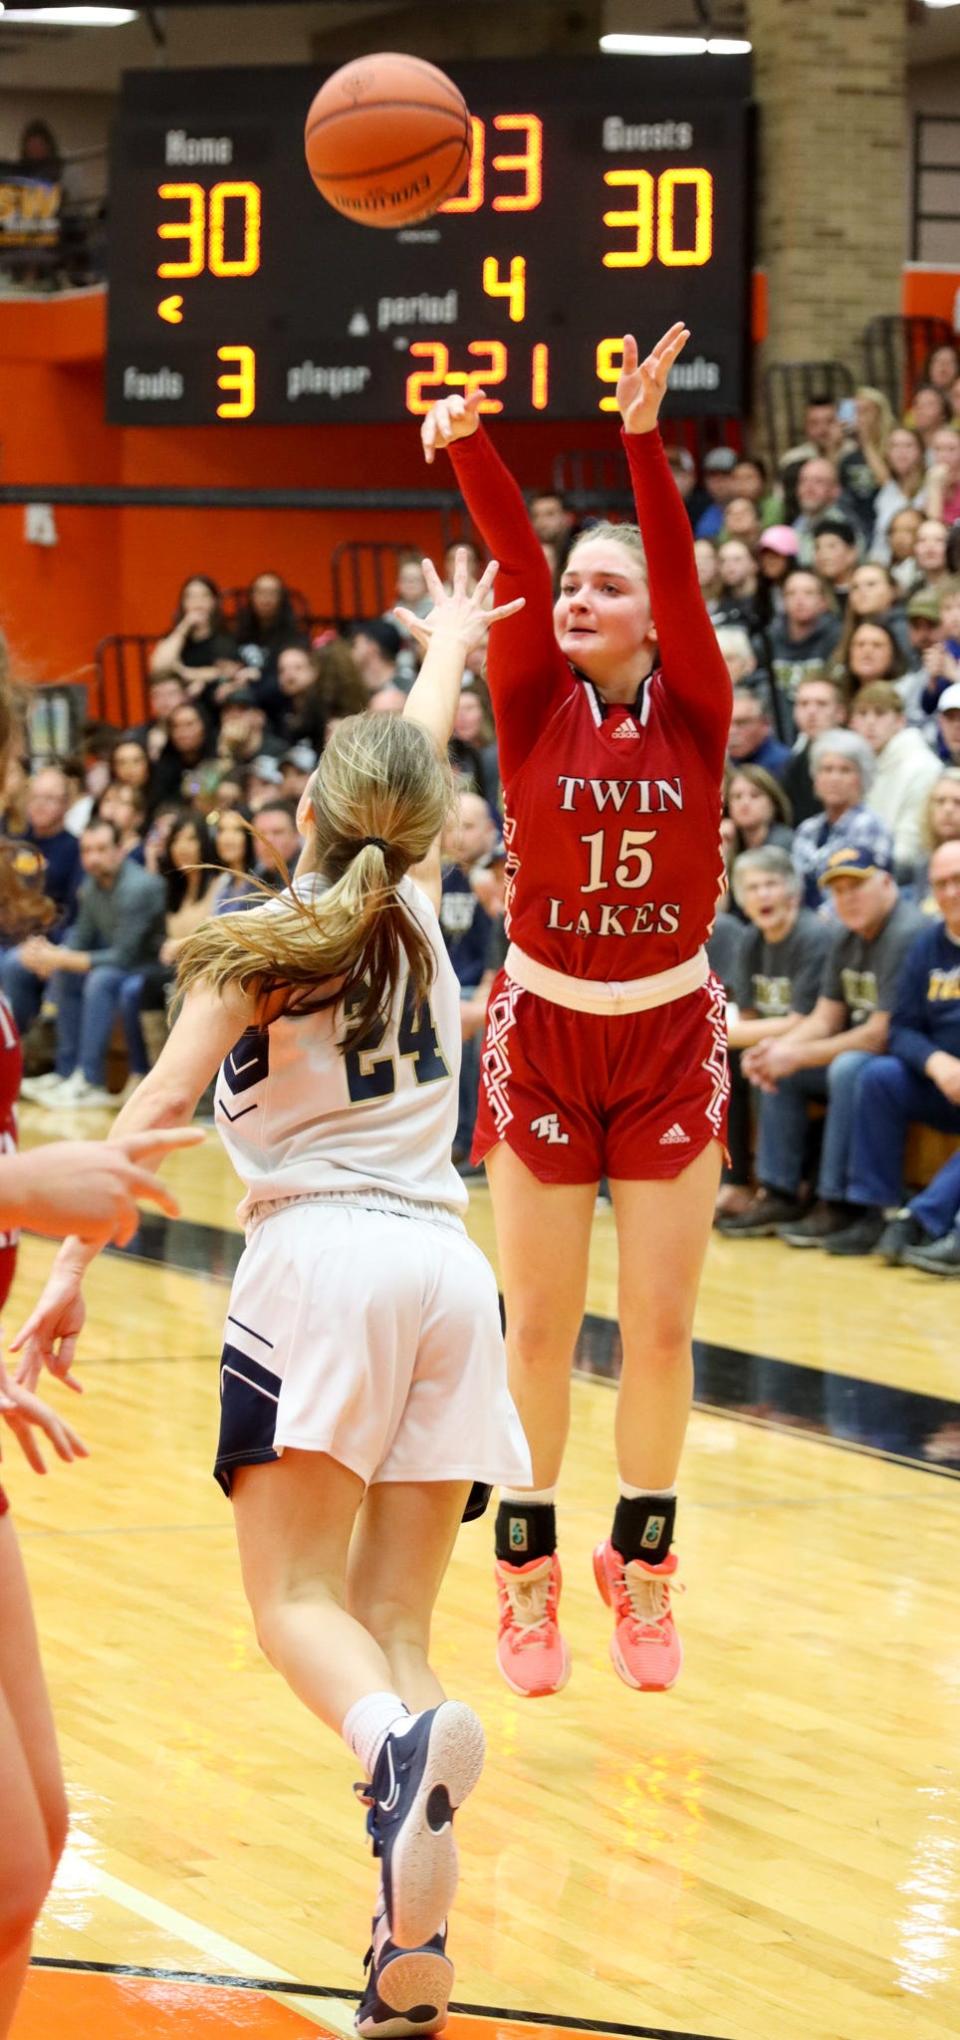 Twin Lakes junior guard Olivia Nickerson shoots a 3-pointer in the Class 3A north semistate championship game at LaPorte on Feb. 18, 2023.